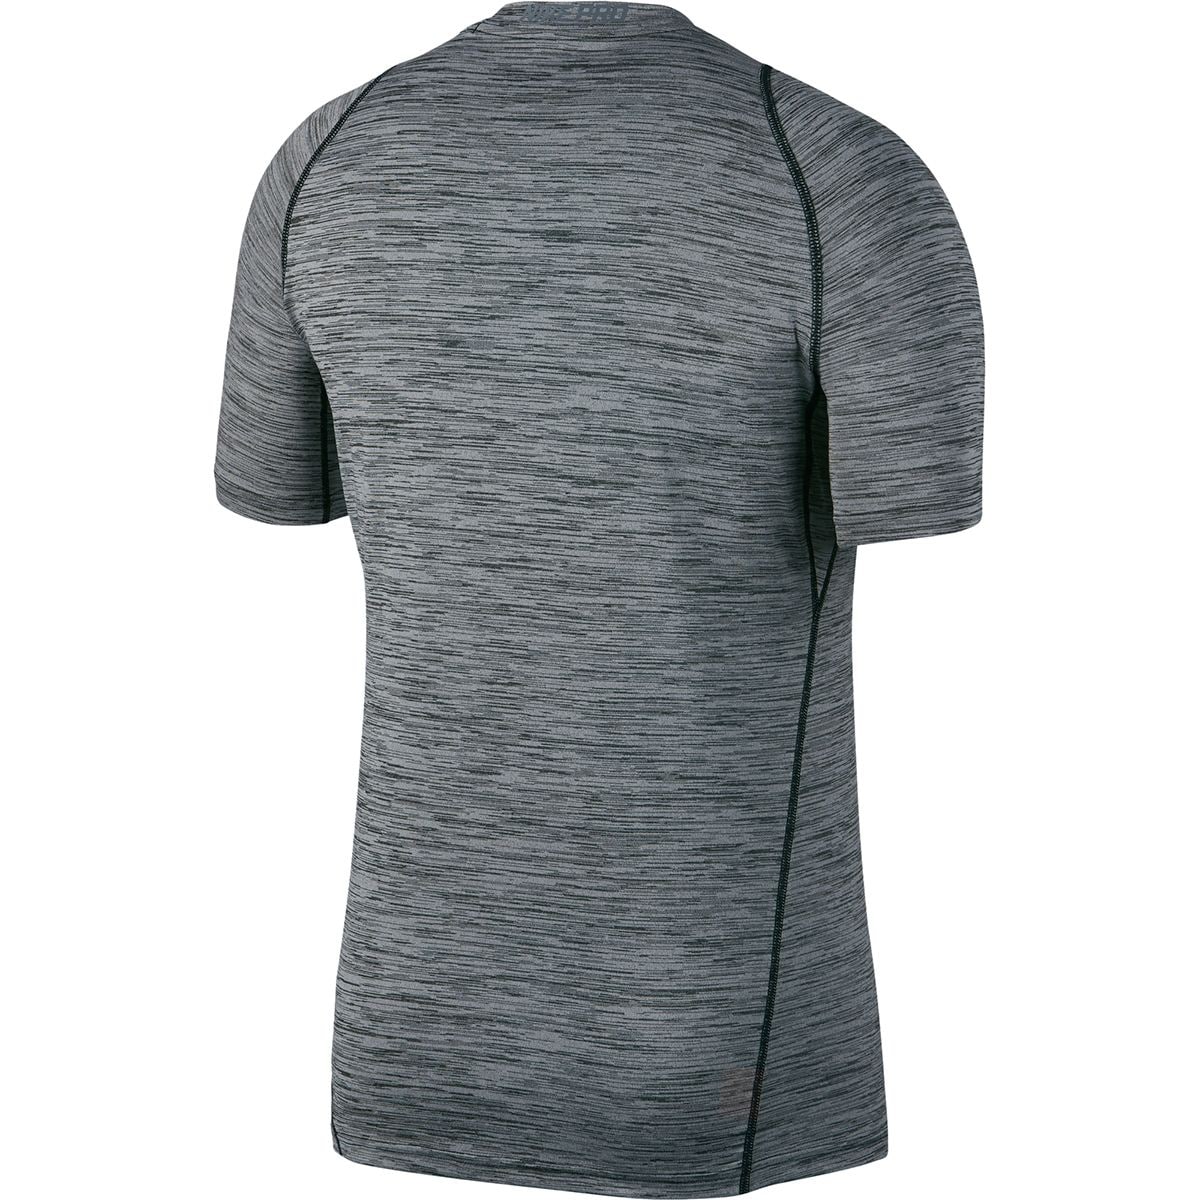 Nike NikePro Short-Sleeve Fitted Heather Top - Men's | Backcountry.com